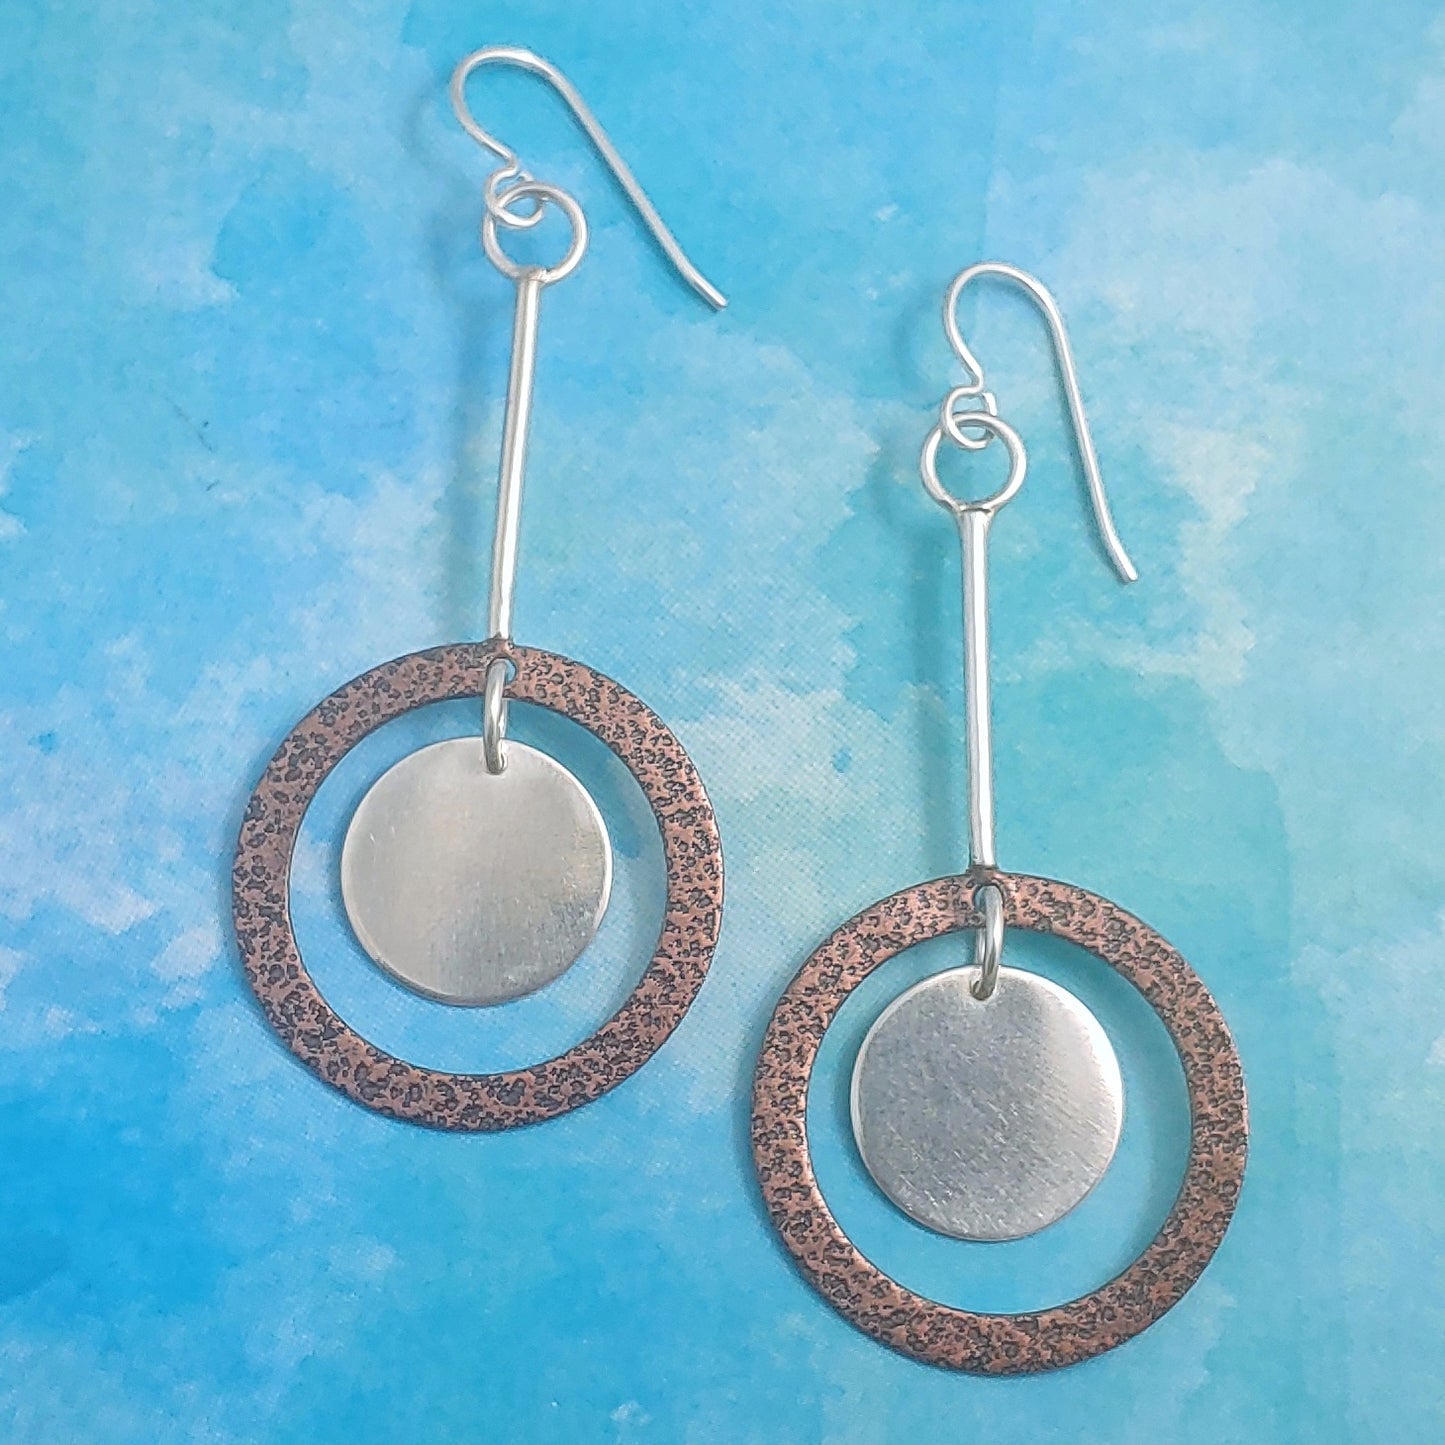 The Double Round Earrings - Copper and Silver